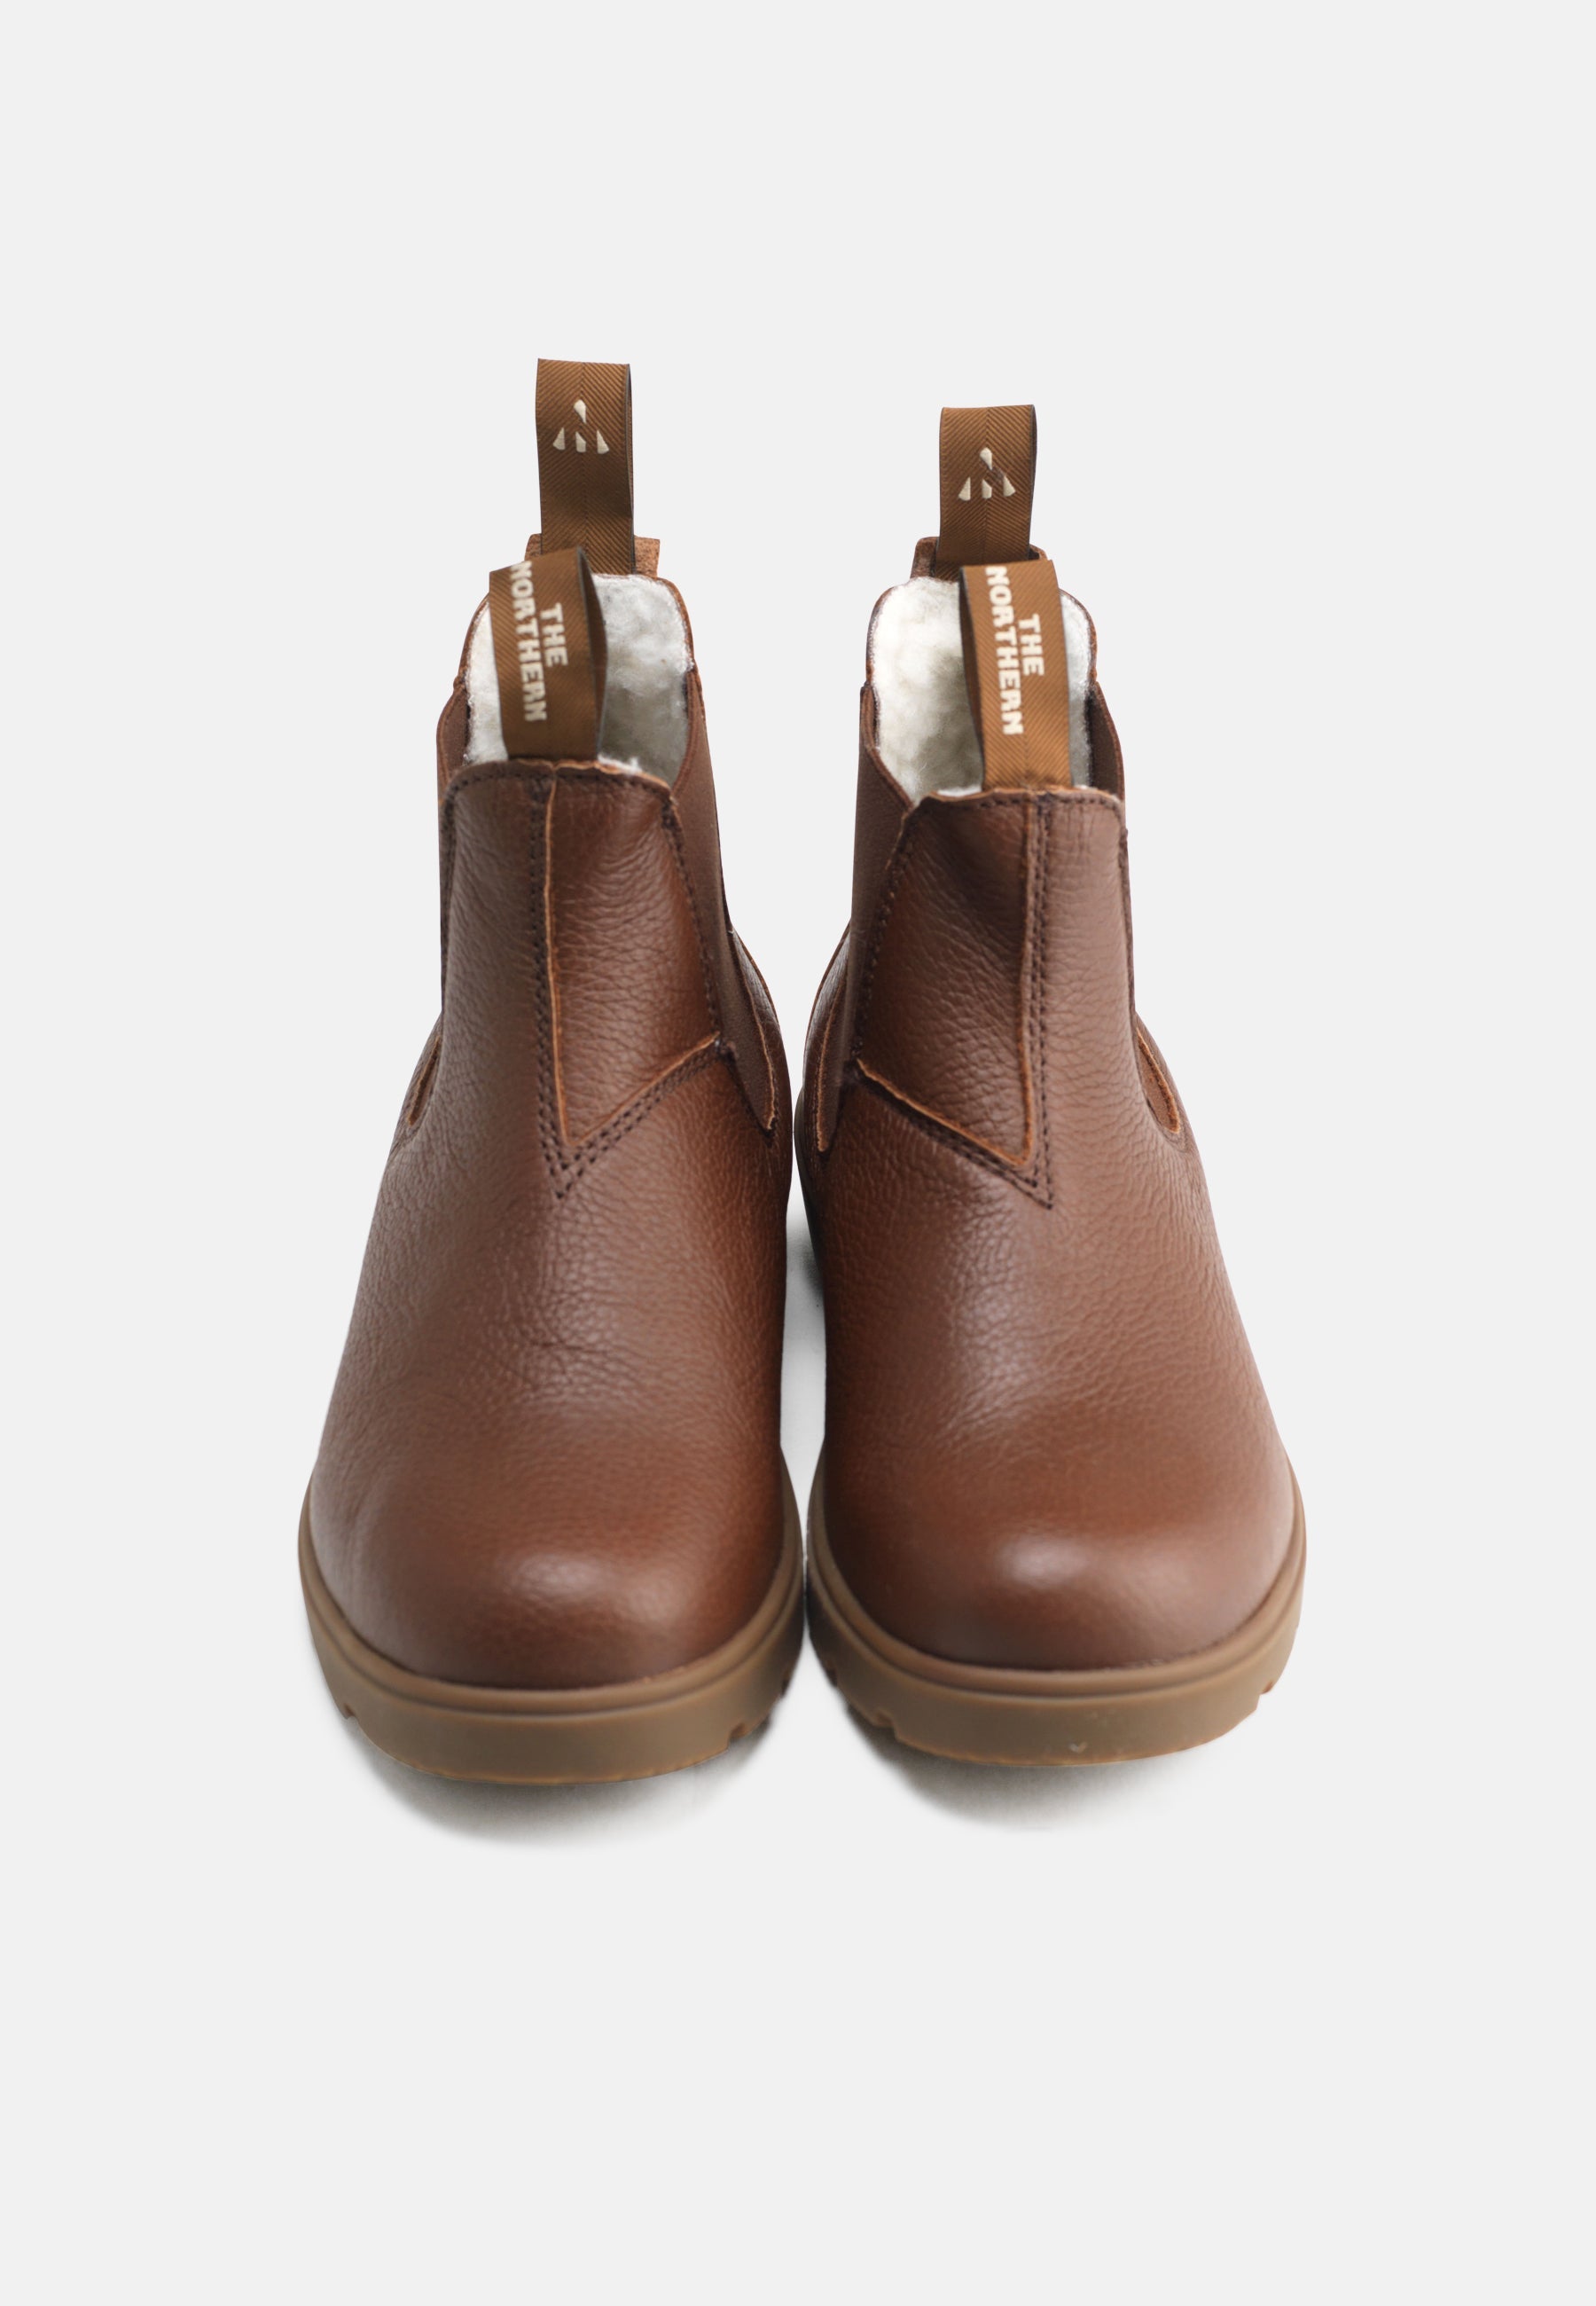 Thor Warm Lined Boot Elk Pull Up Leather - Mahogany